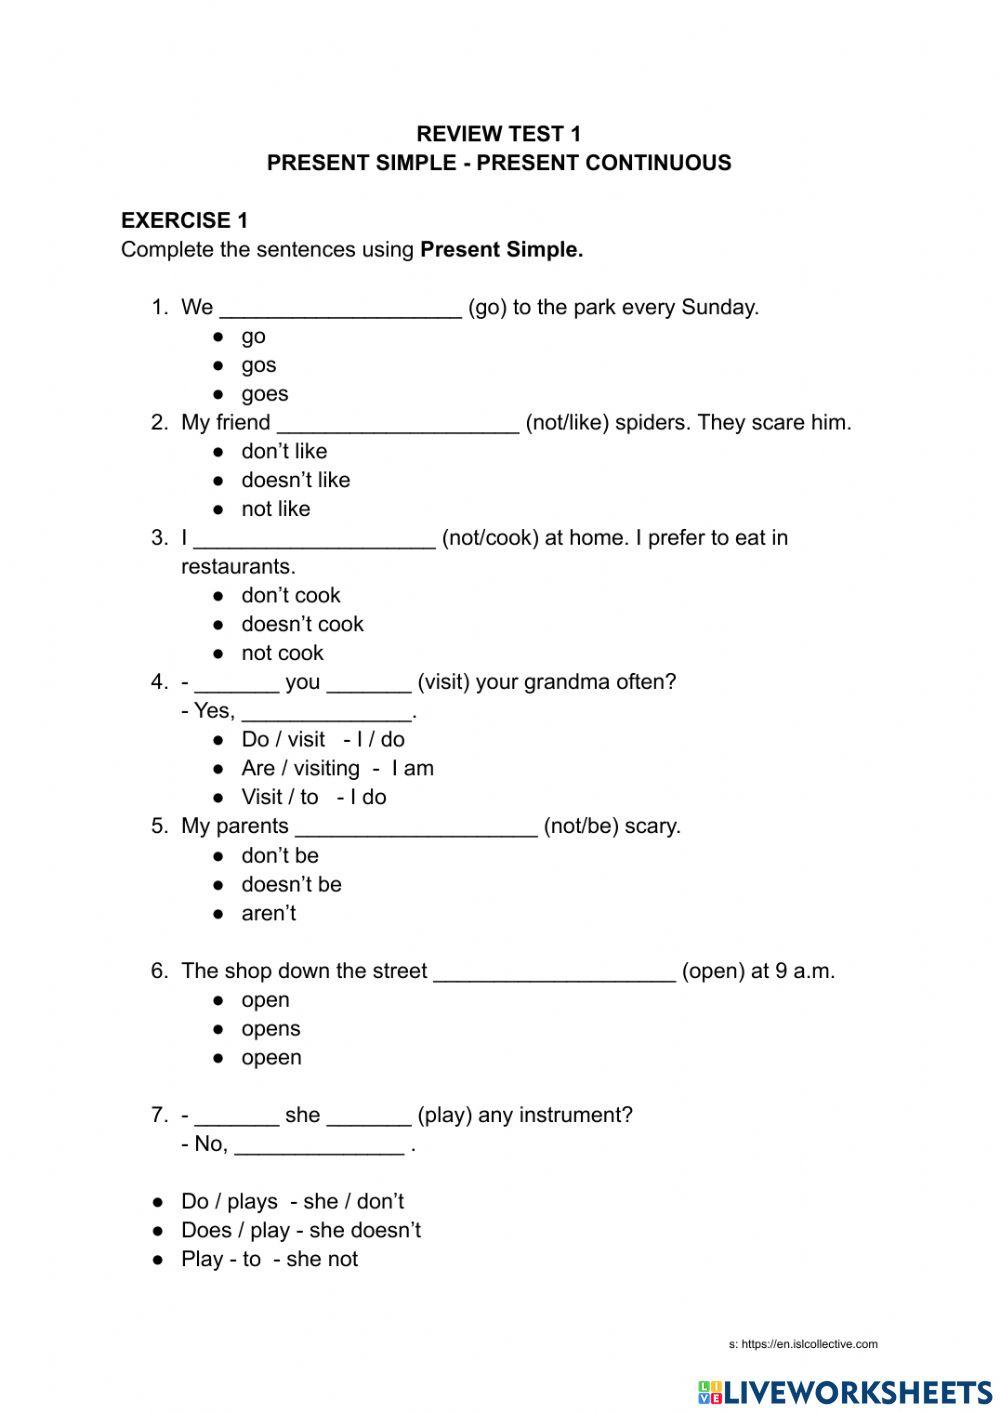 Present simple present continuous review worksheet | Live Worksheets